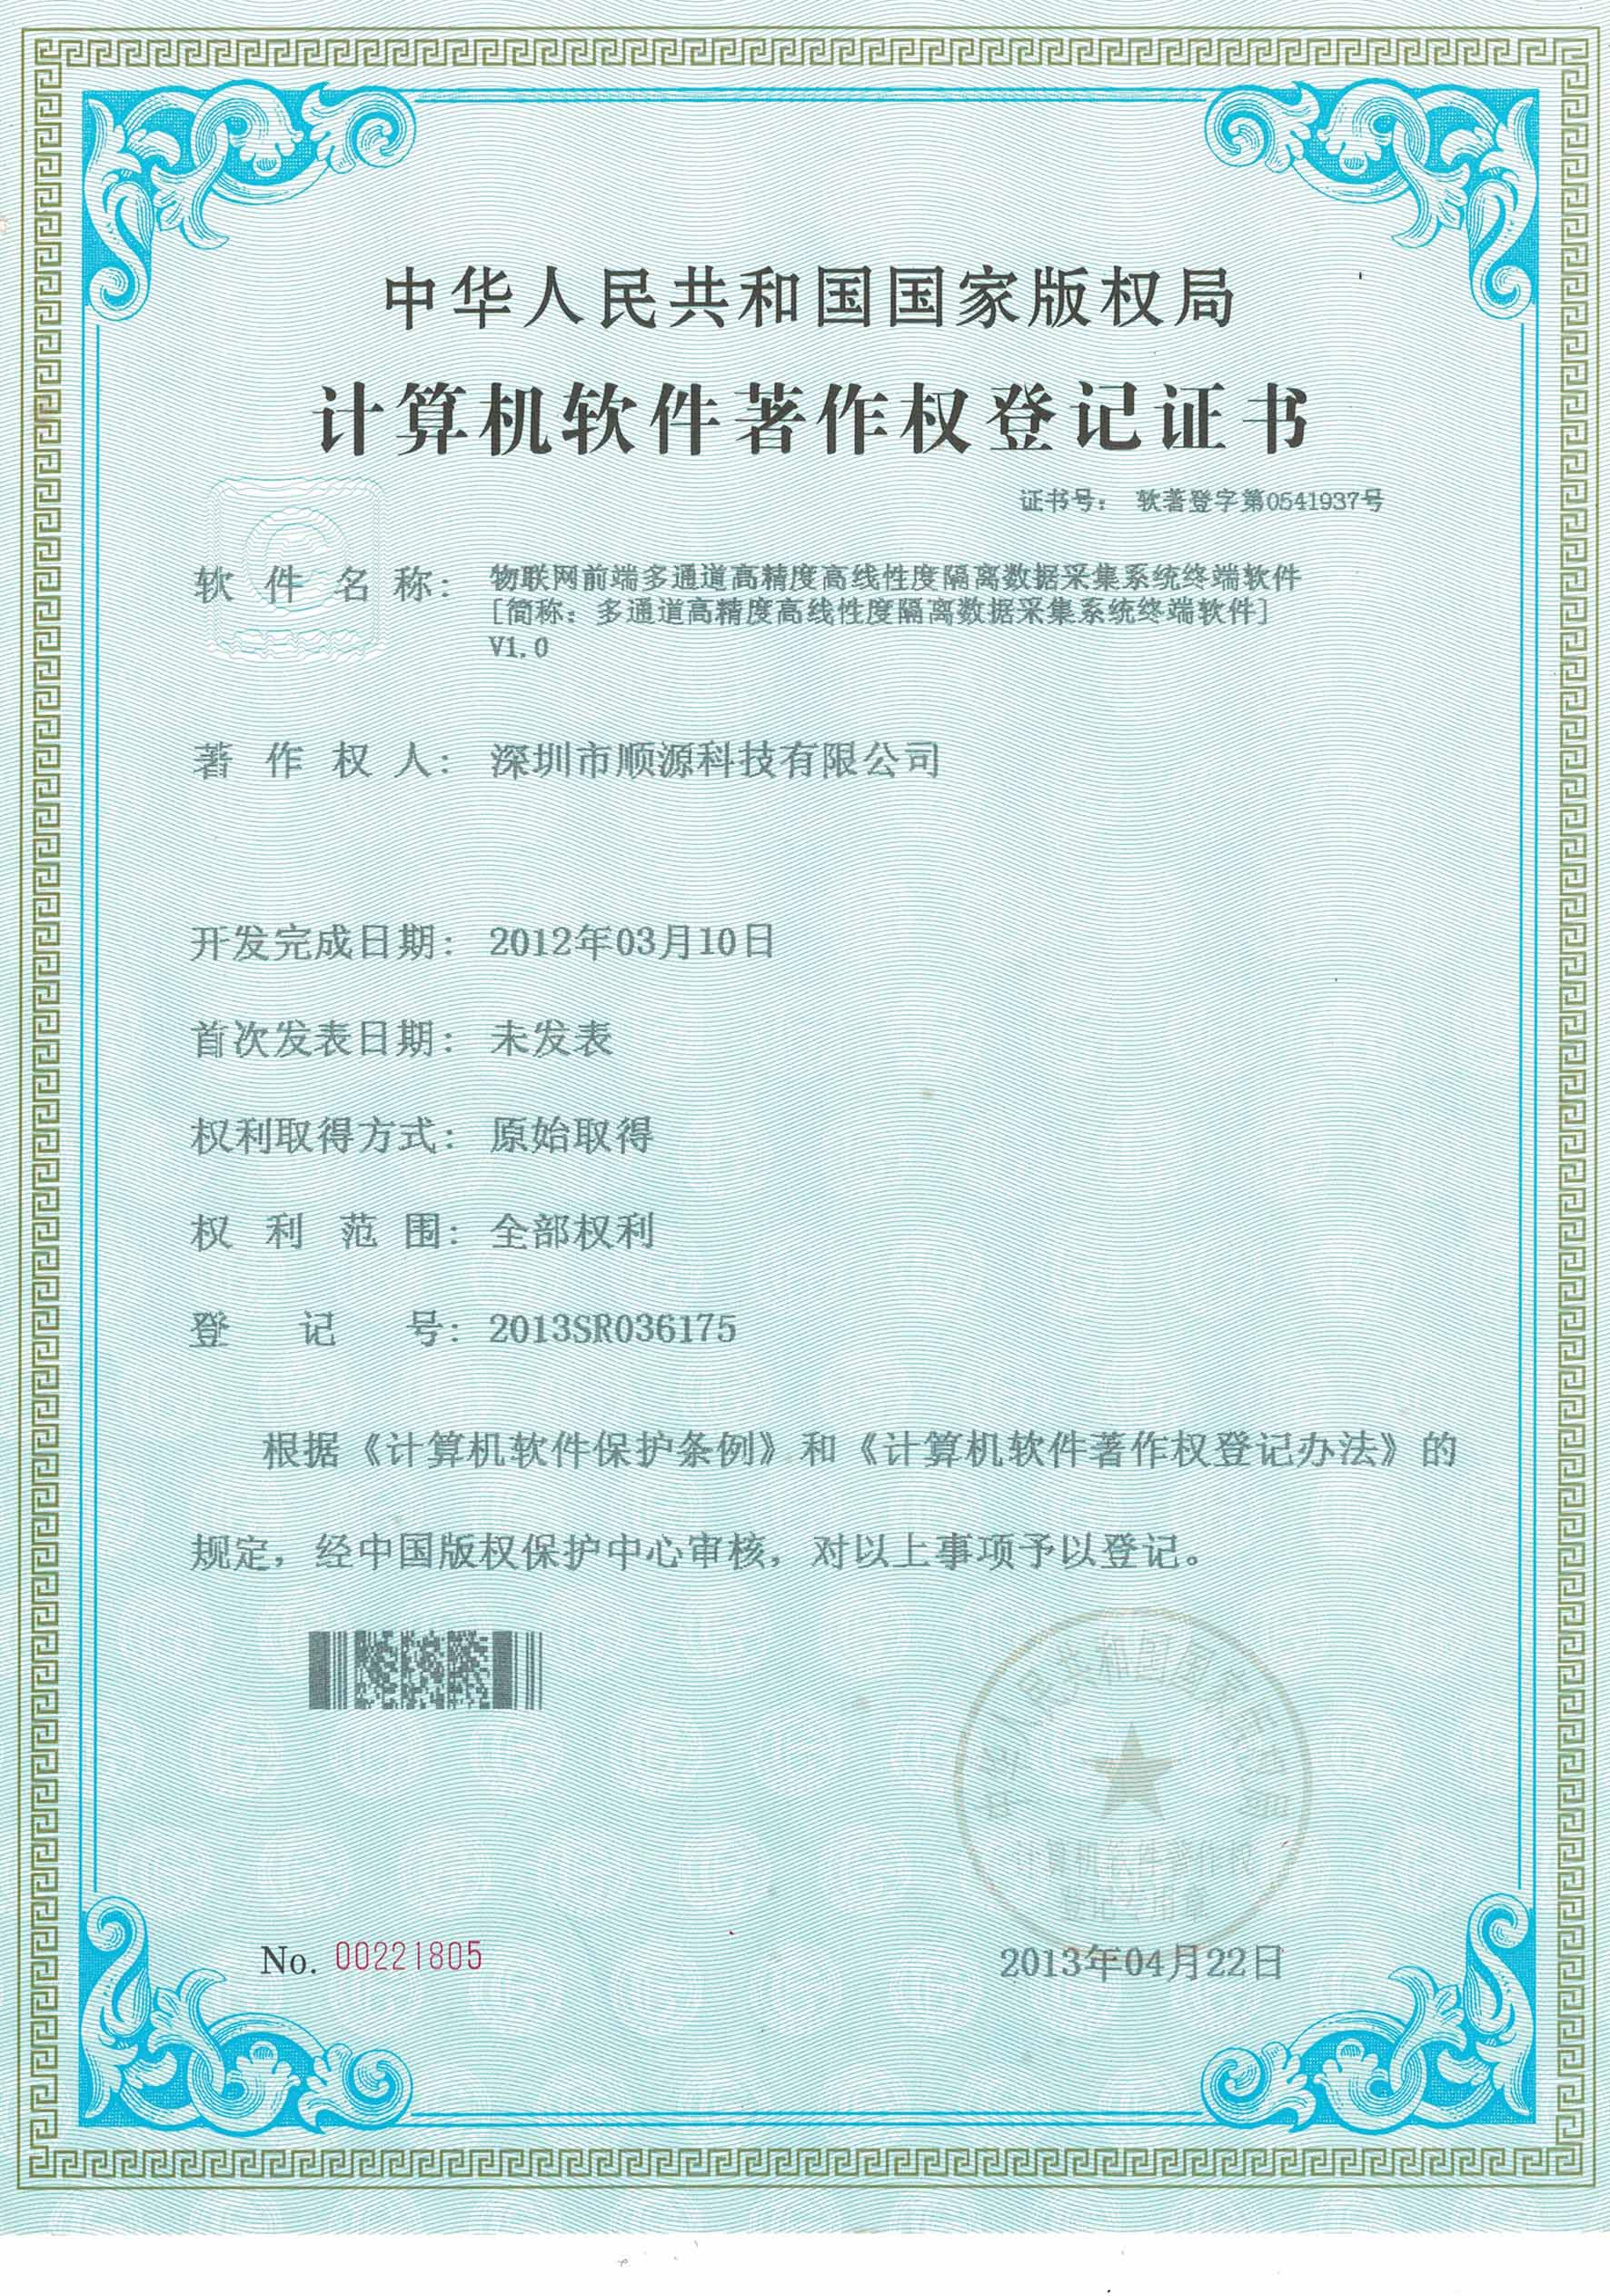 18.Sunyuan Technology Ethernet Internet of Things bus data acquisition software copyright certificate (2012-2021)